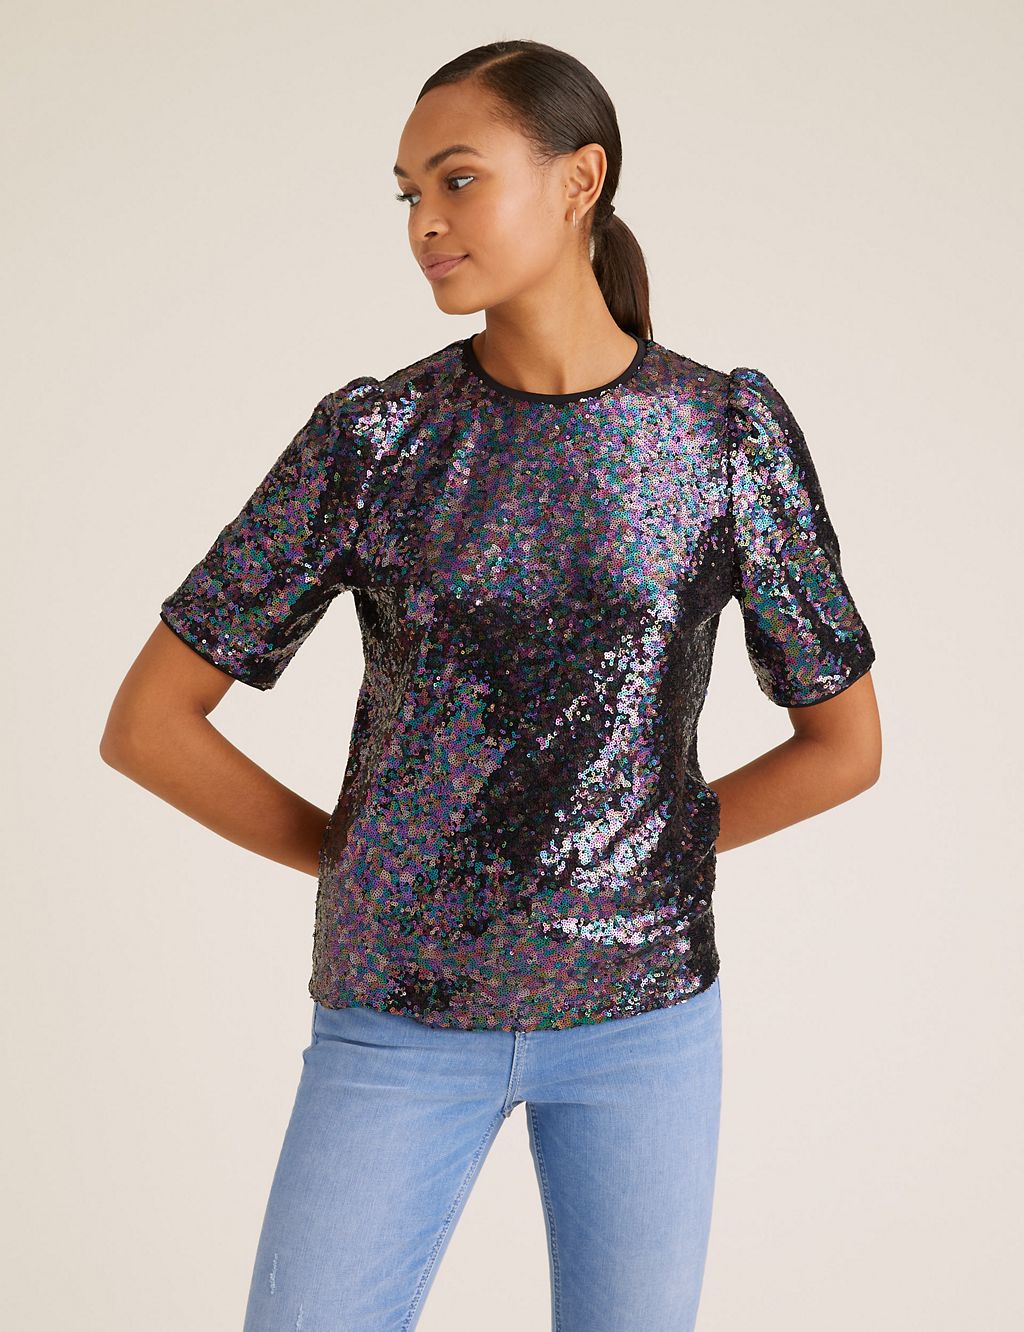 Sequin Crew Neck Short Sleeve Top | M&S Collection | M&S